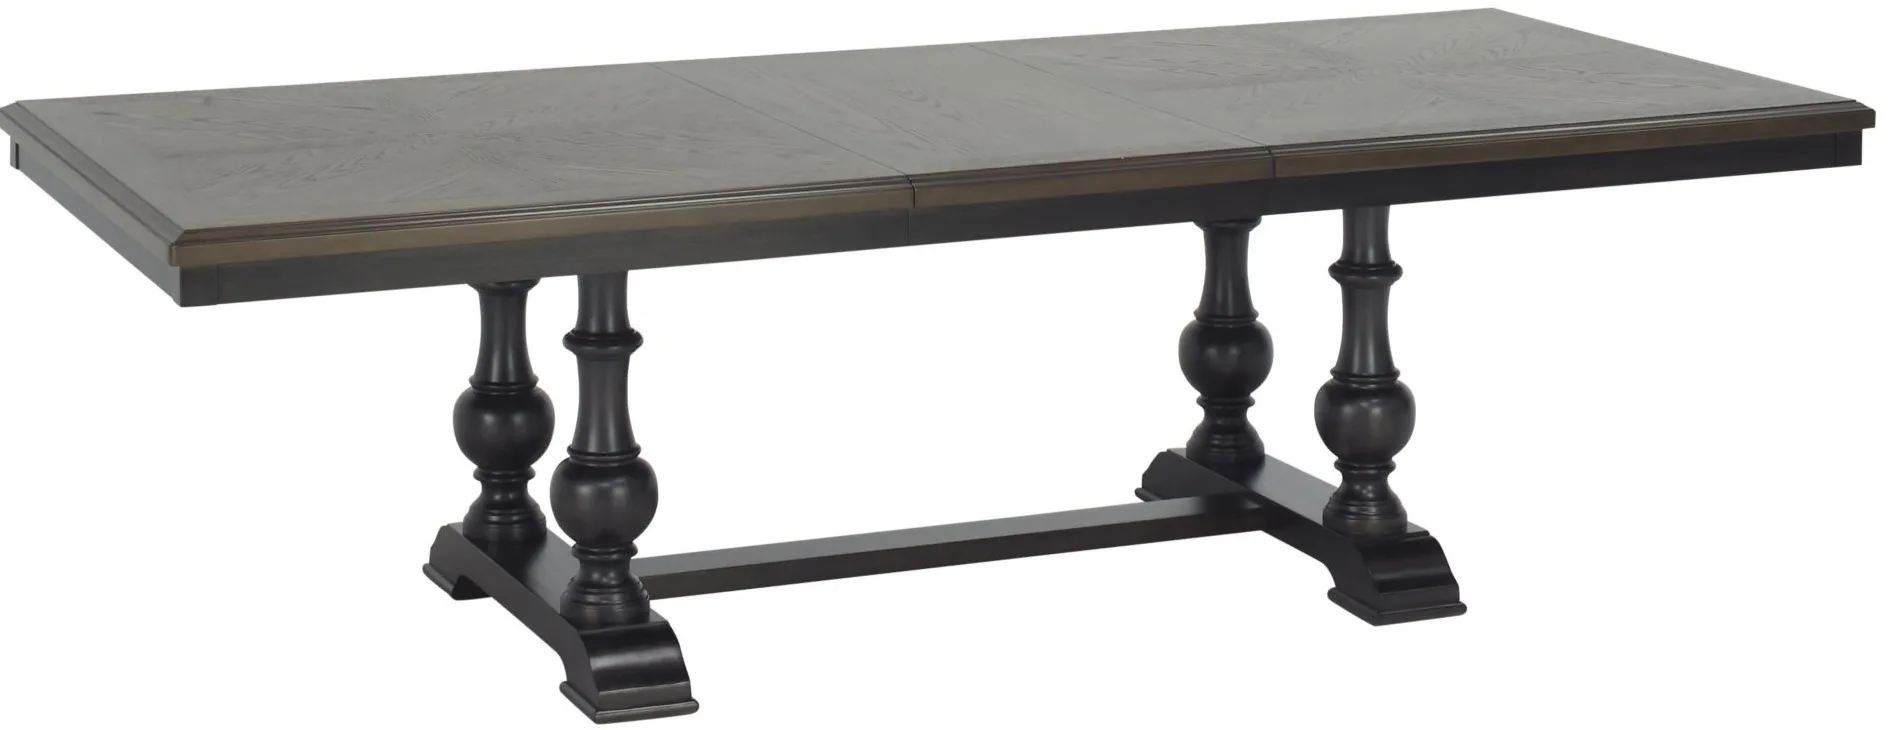 Montane Dining Table w/ Leaf in Charcoal Brown by Homelegance